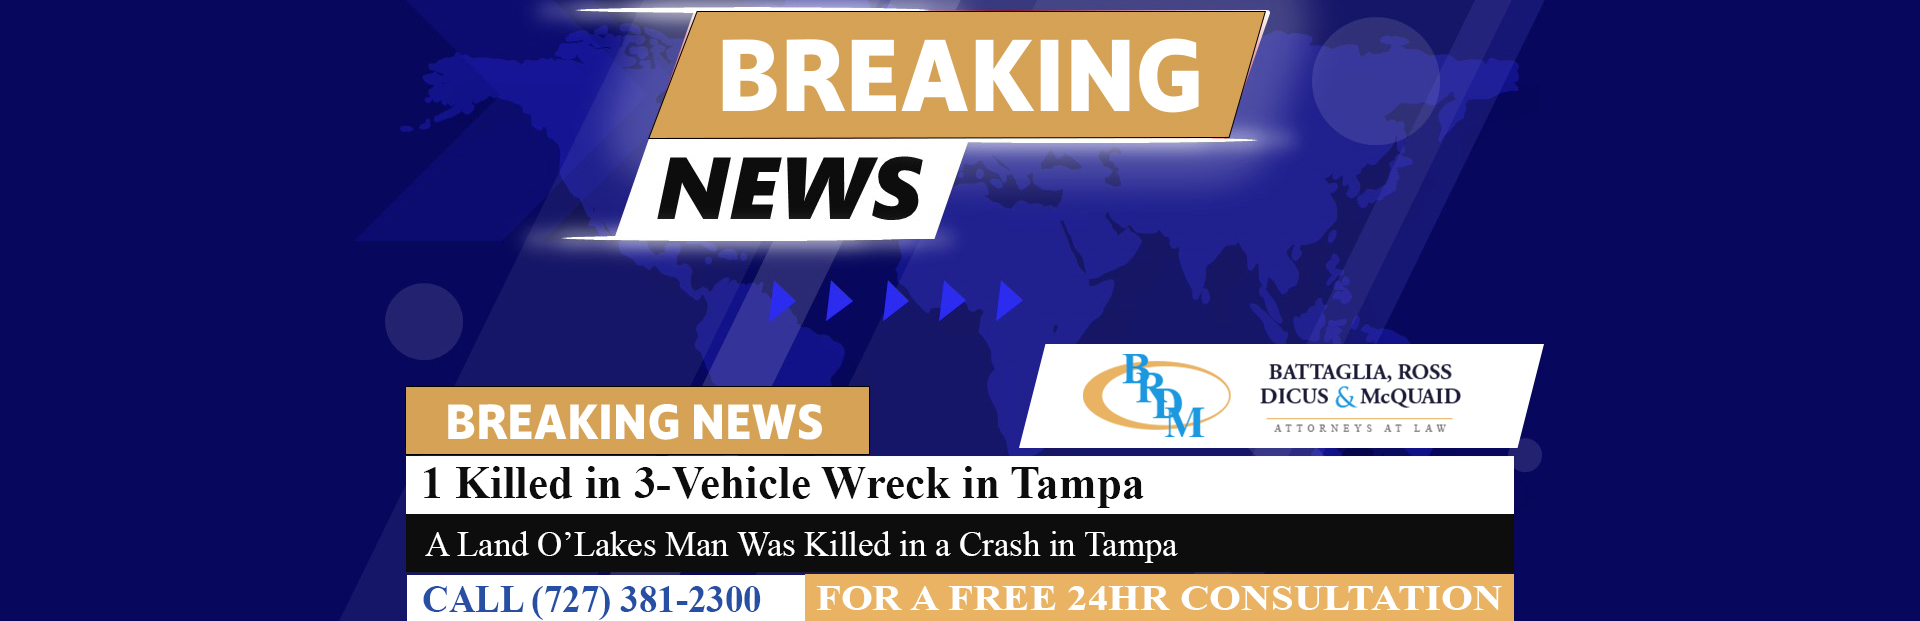 [01-03-23] 1 Killed in 3-Vehicle Wreck in Tampa